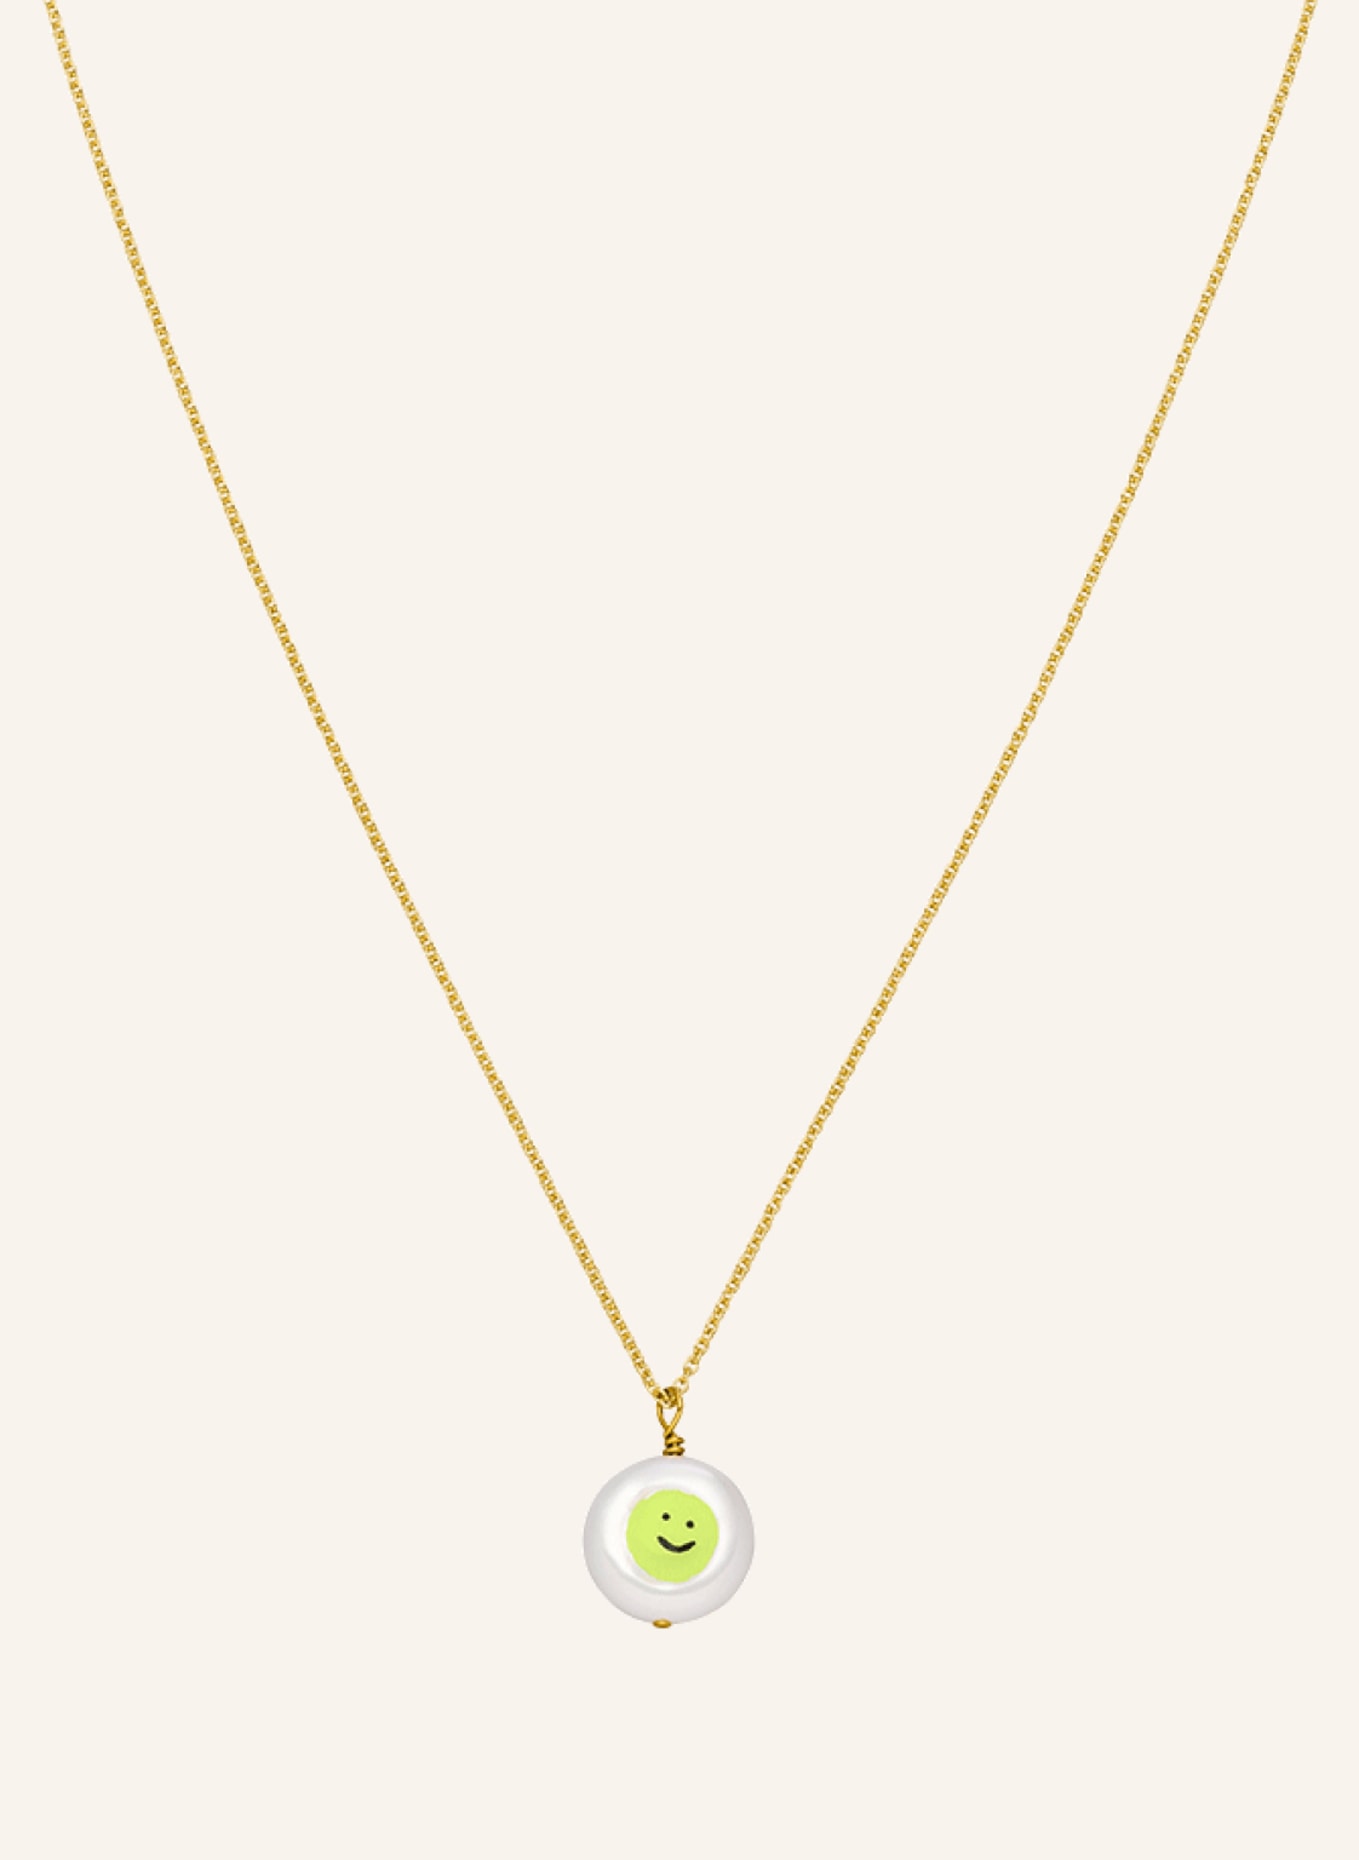 NINA KASTENS Kette SMILEY NECKLACE (LIME WITH BLACK) by GLAMBOU, Farbe: GOLD (Bild 2)